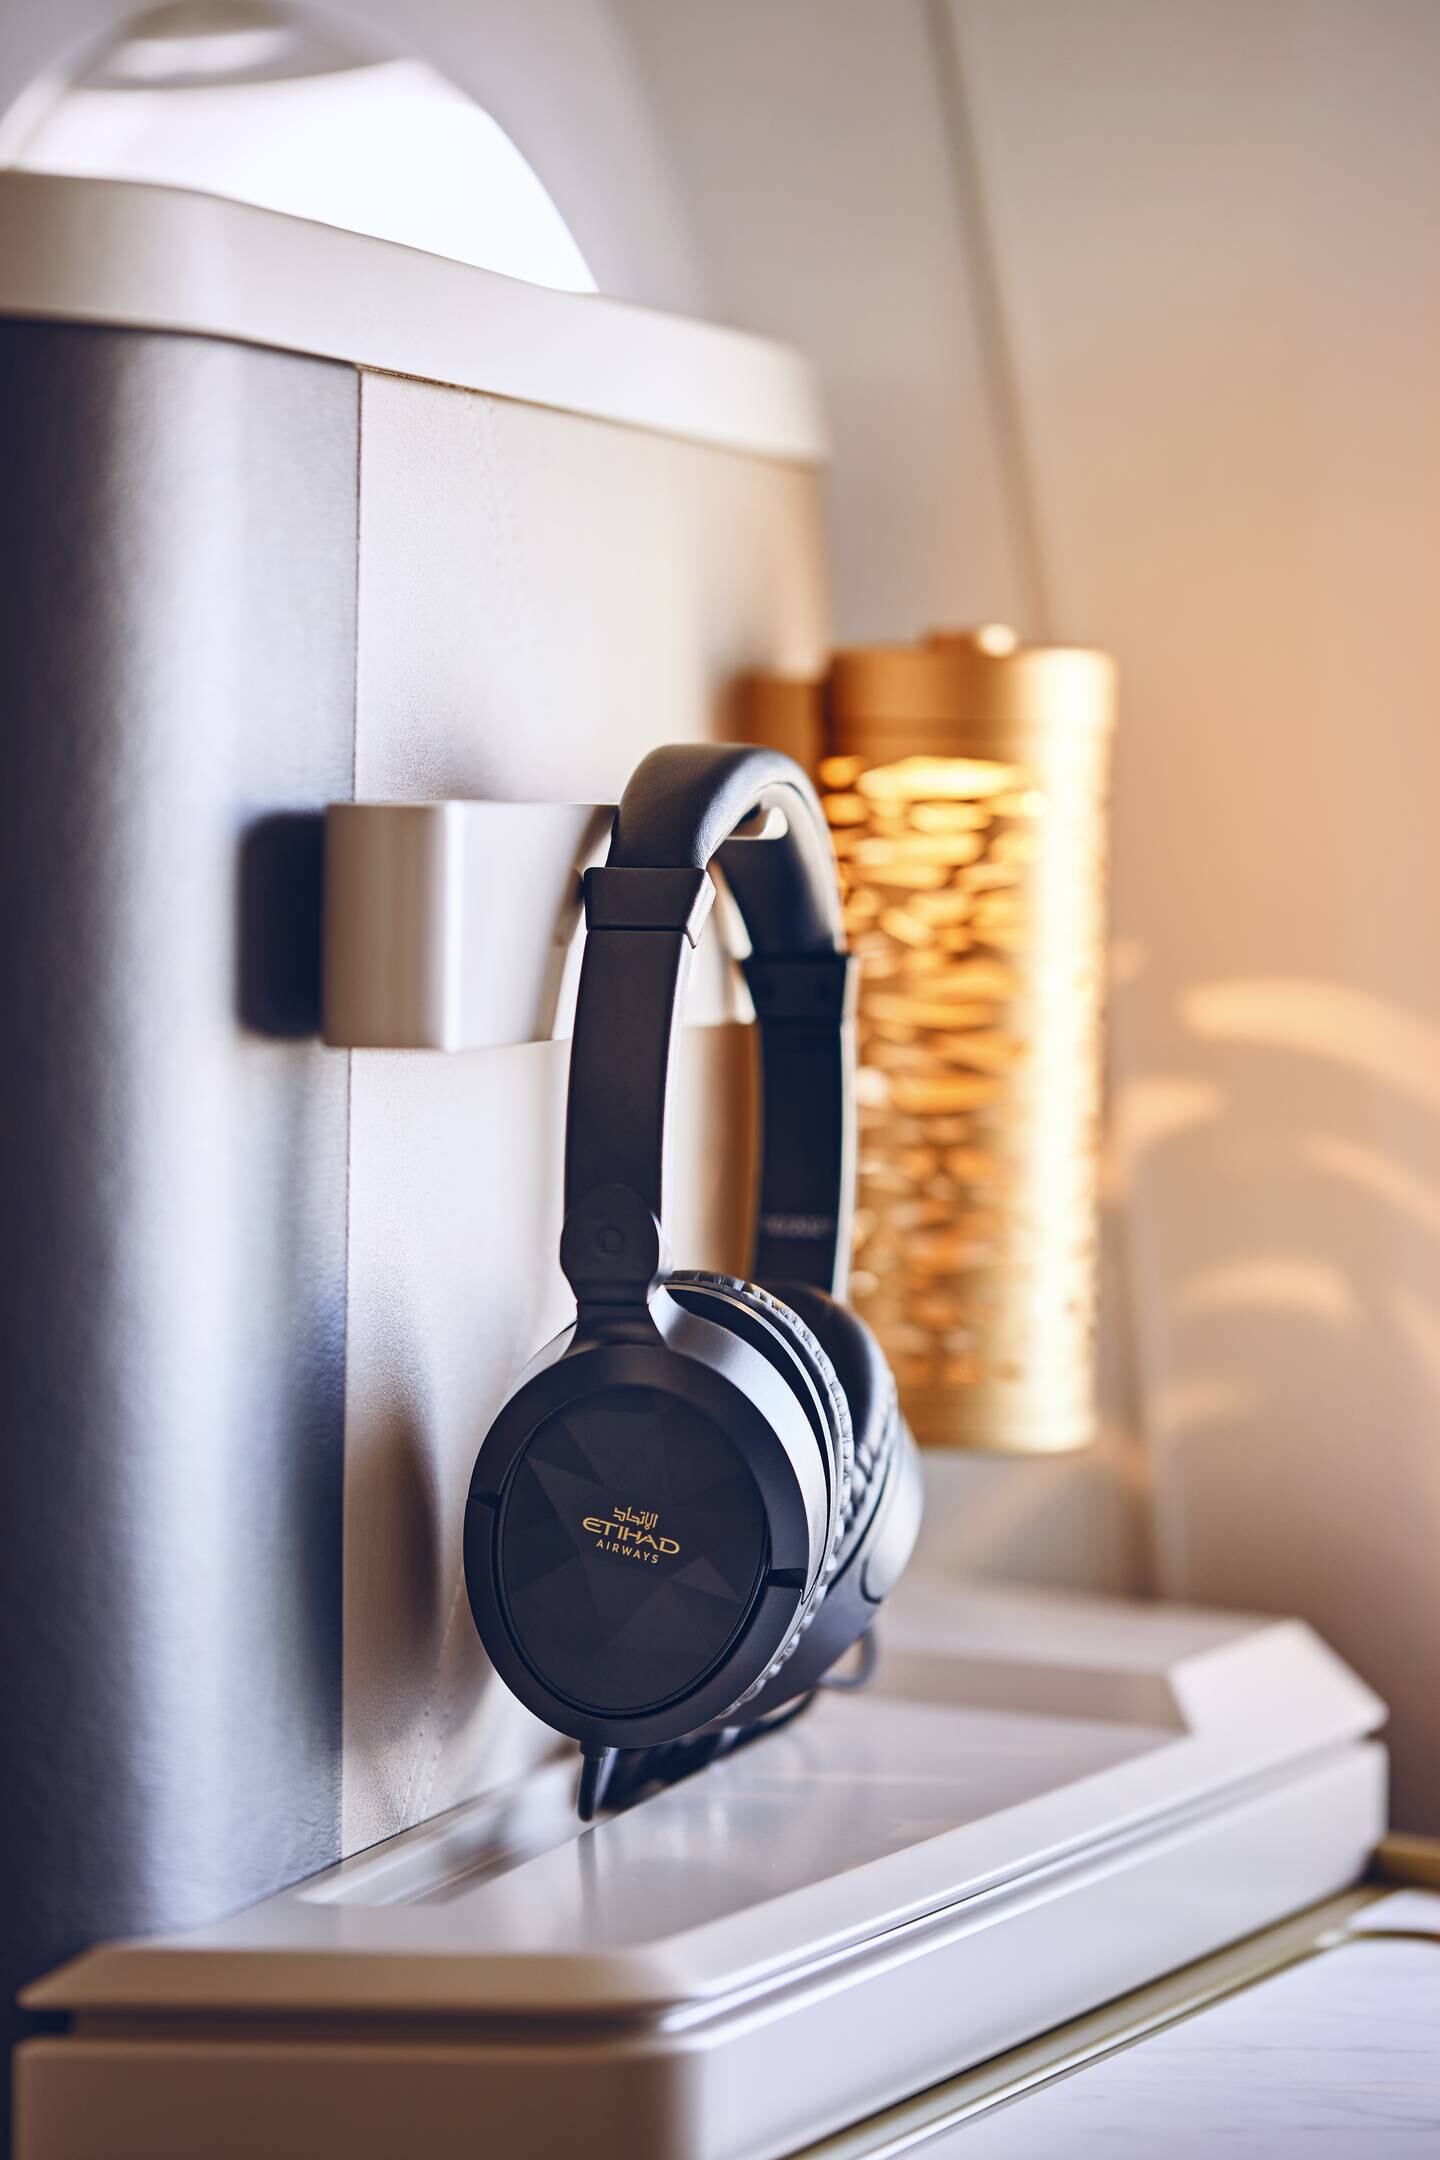 Details like noise-cancelling headphones and palm-tree inspired lighting columns offer a sense of luxury. Photo: Etihad